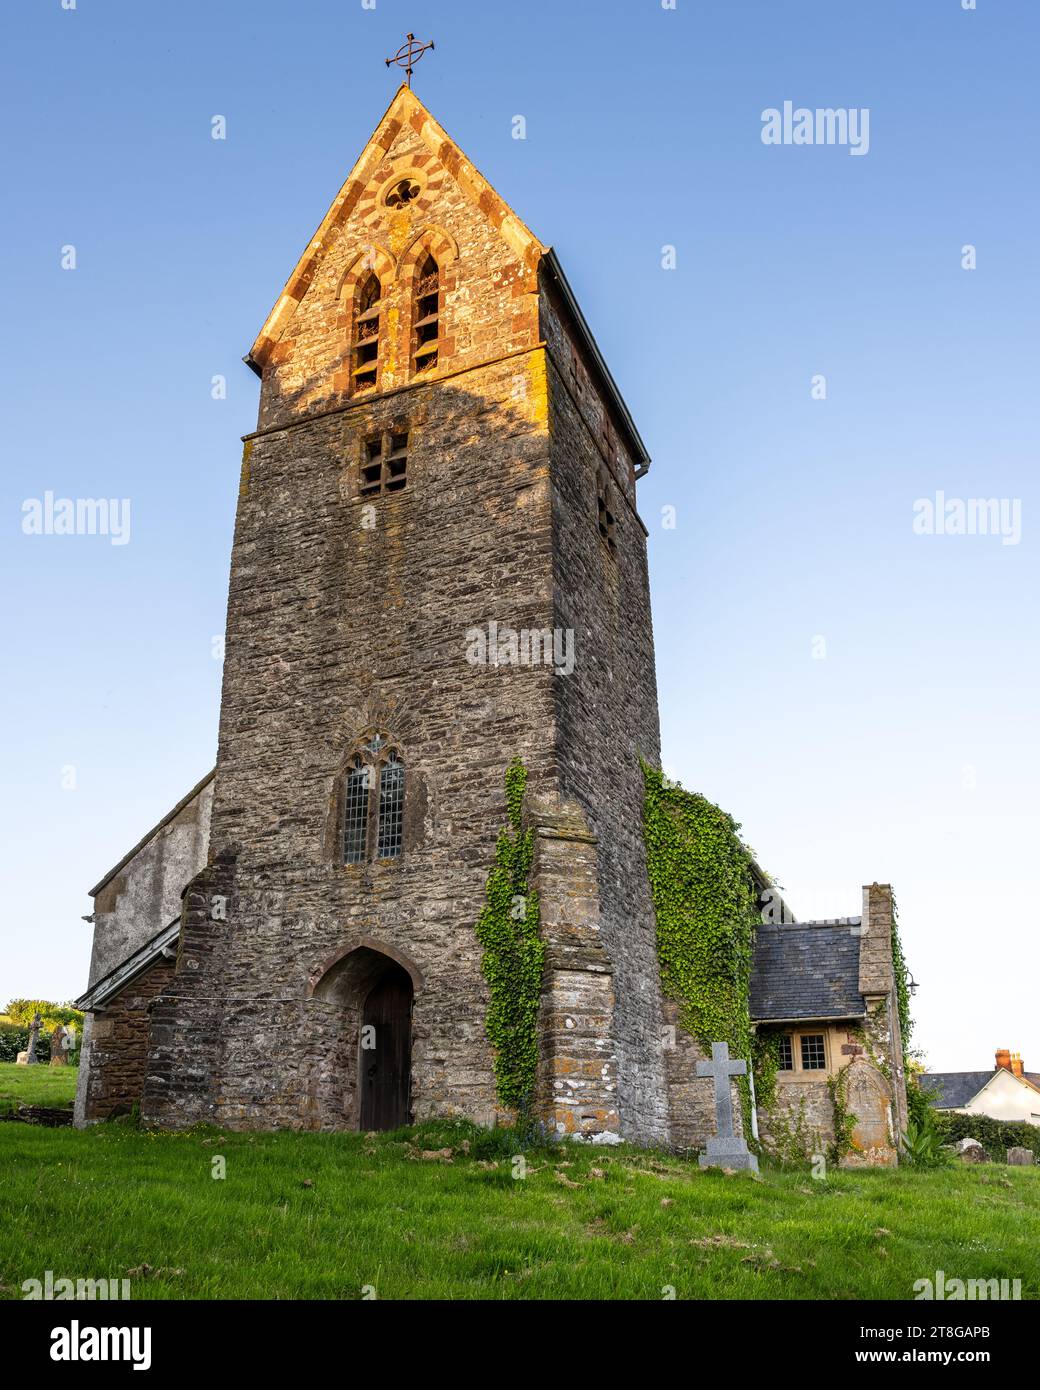 The mediaeval church of St Mary in Luxborough, Somerset. Stock Photo